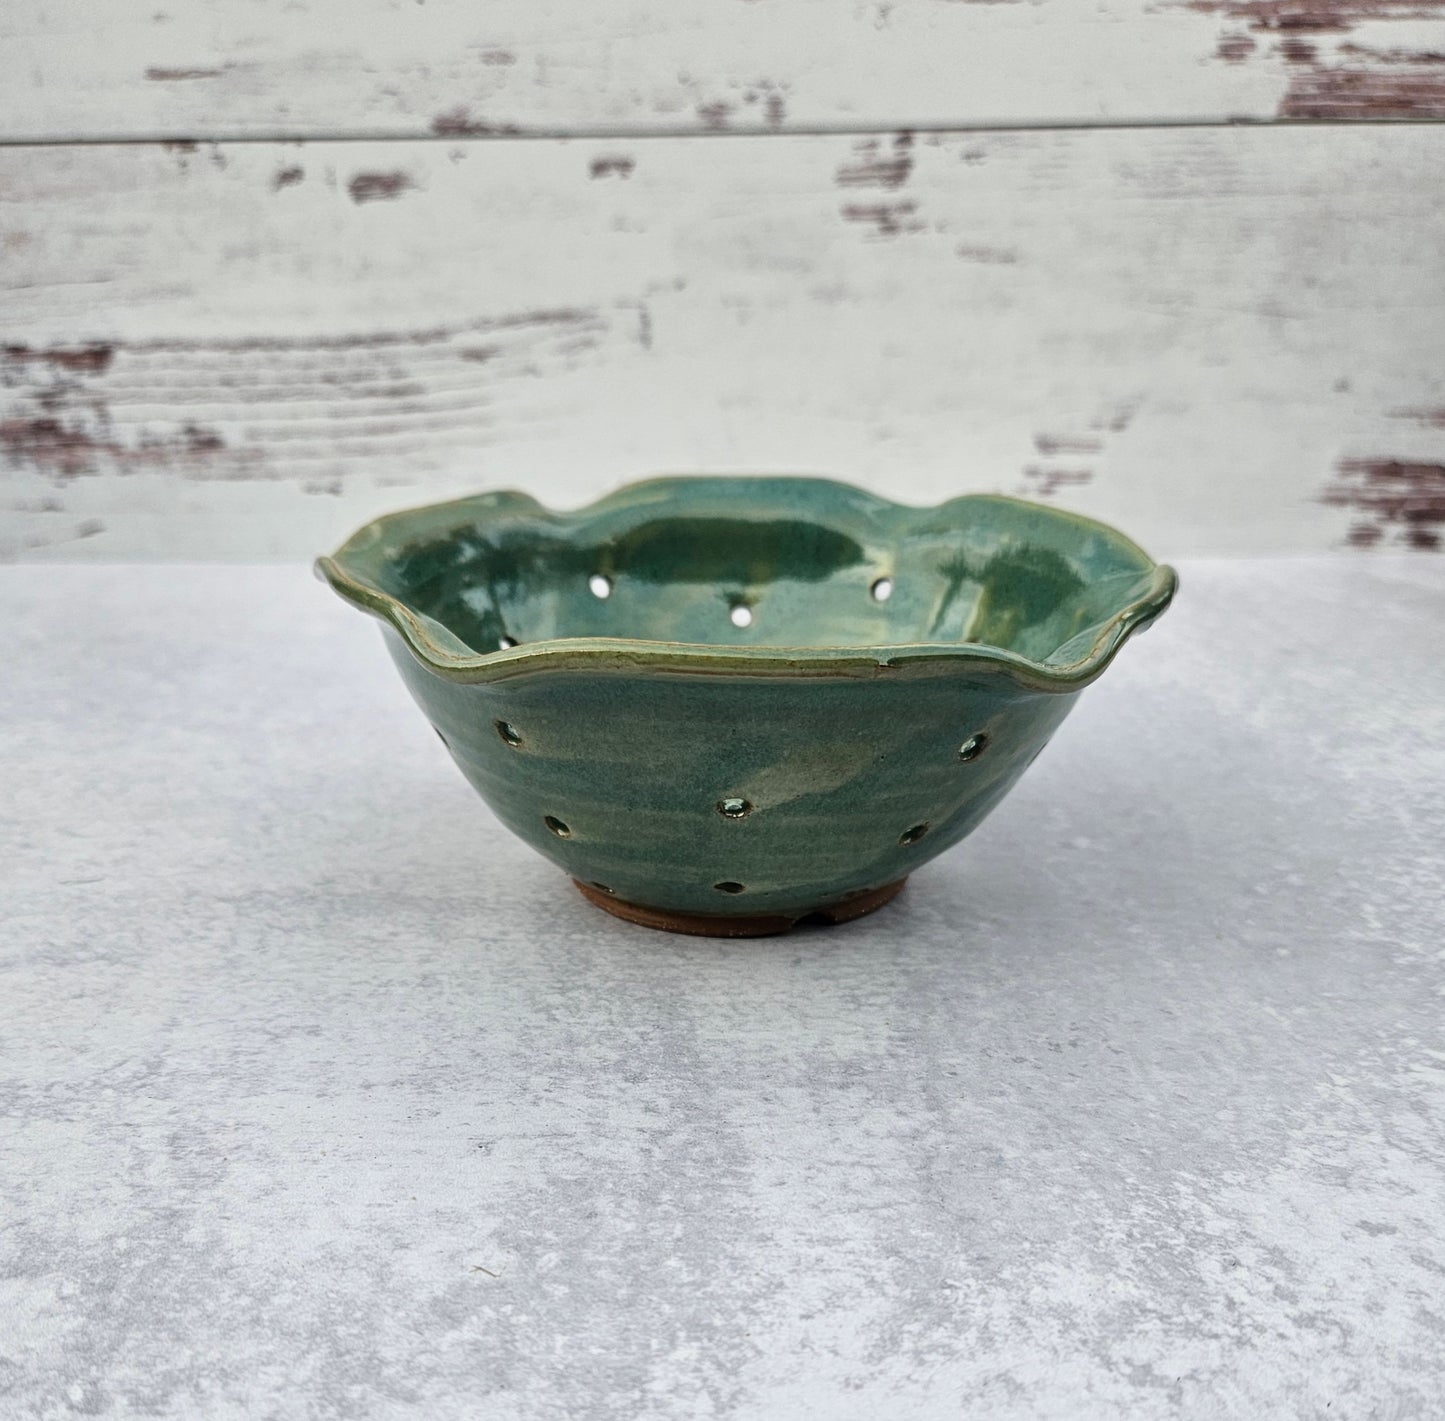 Berry Bowl | Small Green